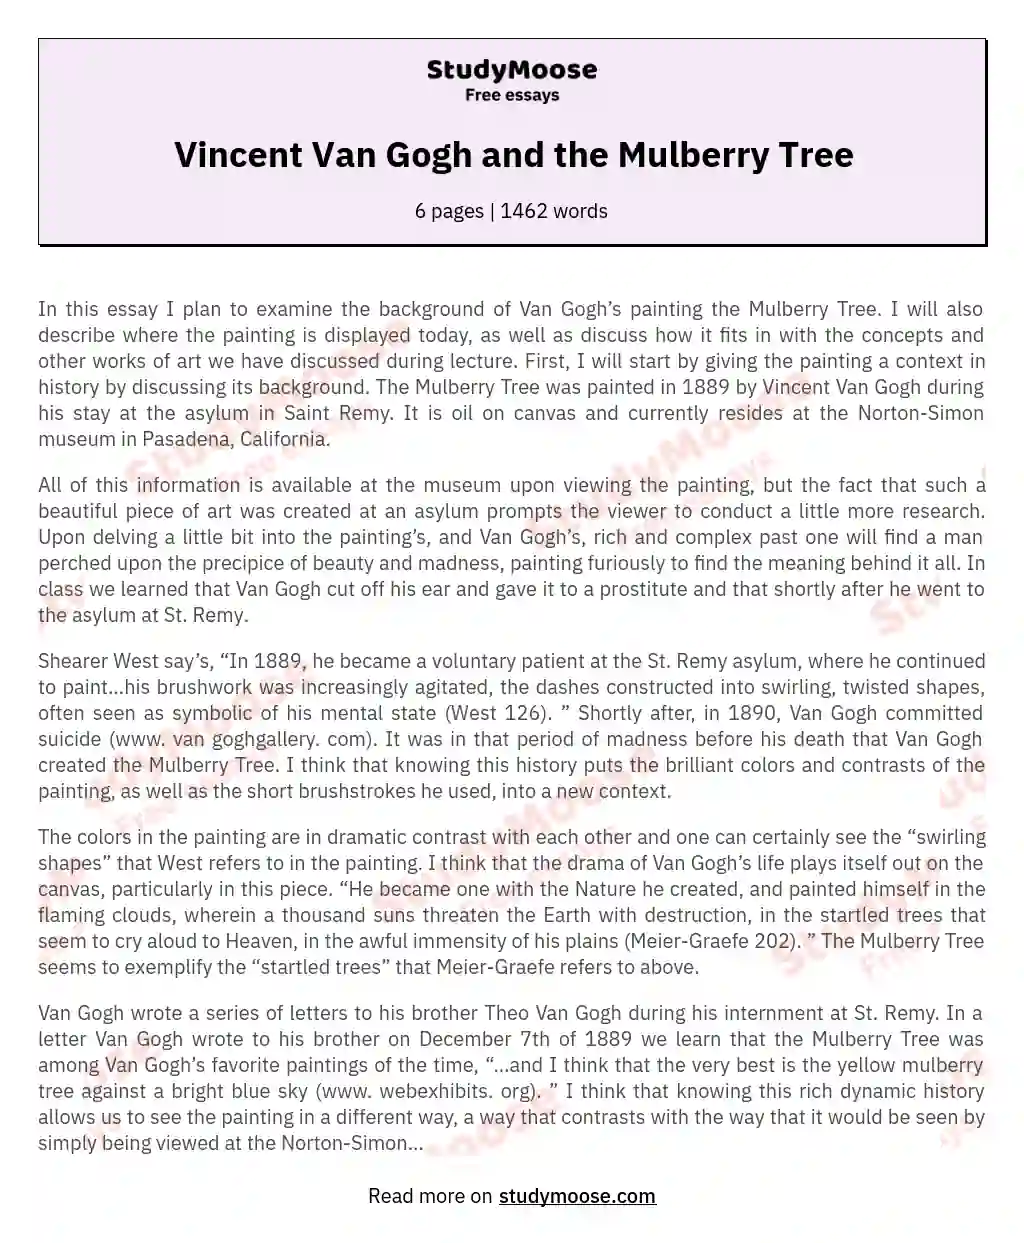 Vincent Van Gogh and the Mulberry Tree essay